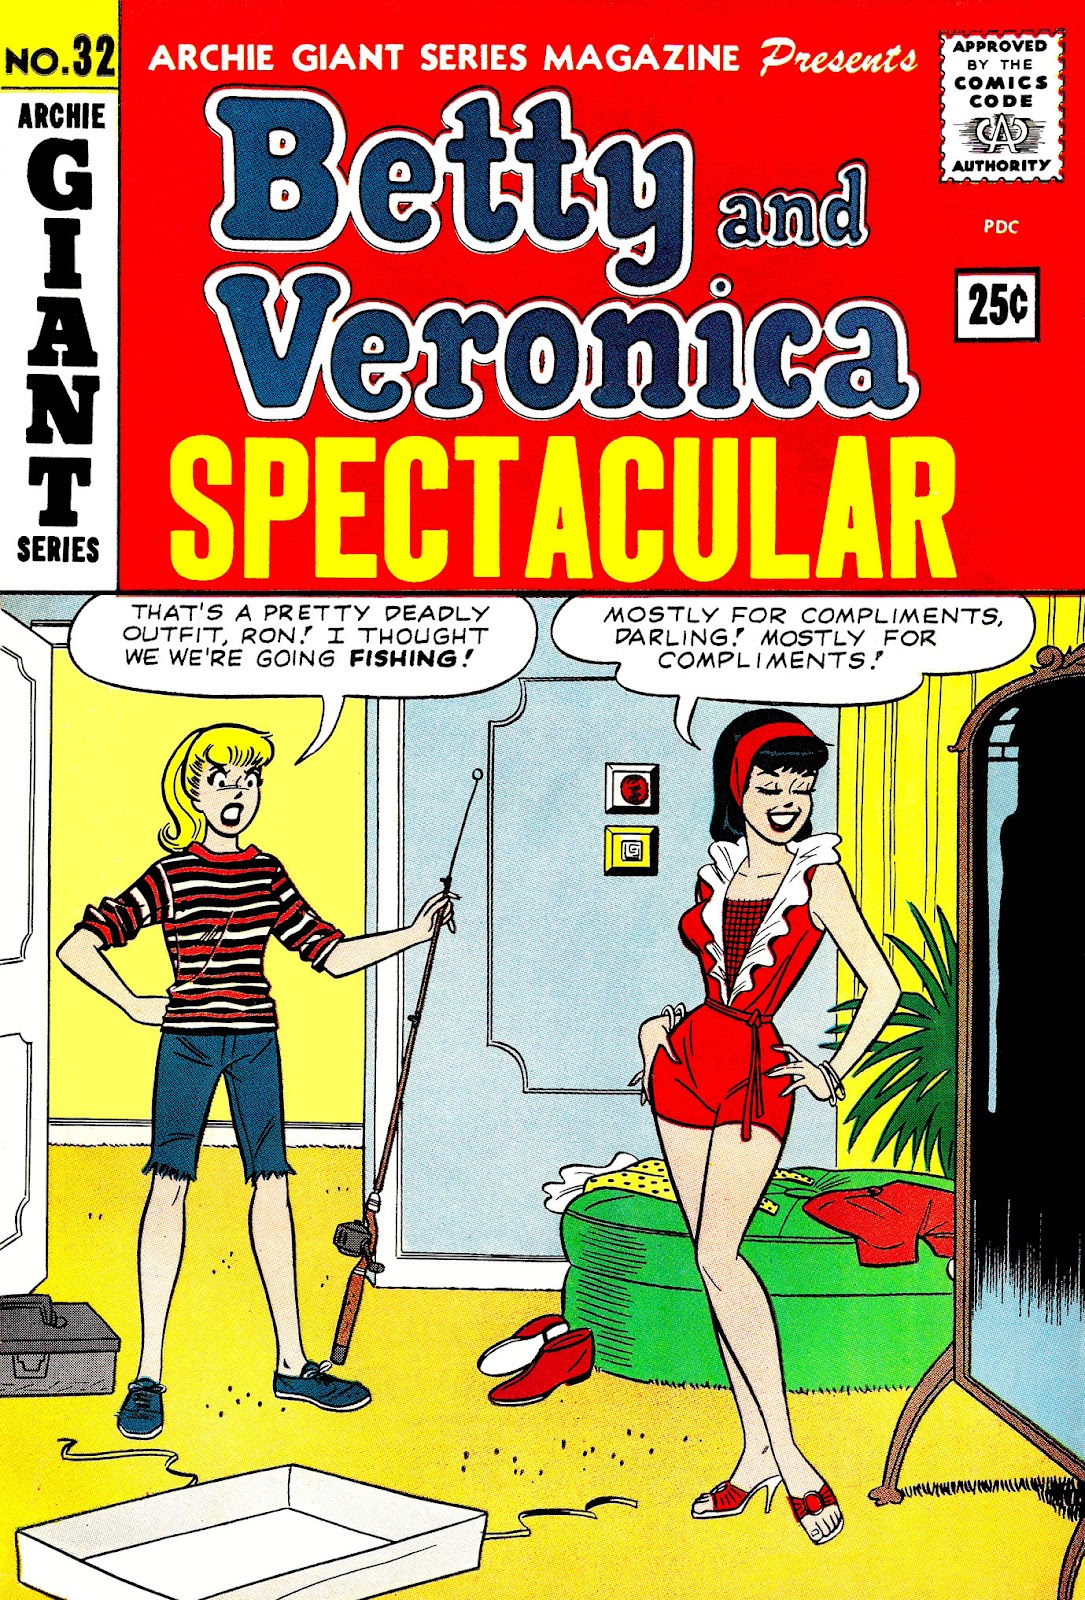 Archie Giant Series Magazine 32 Page 1